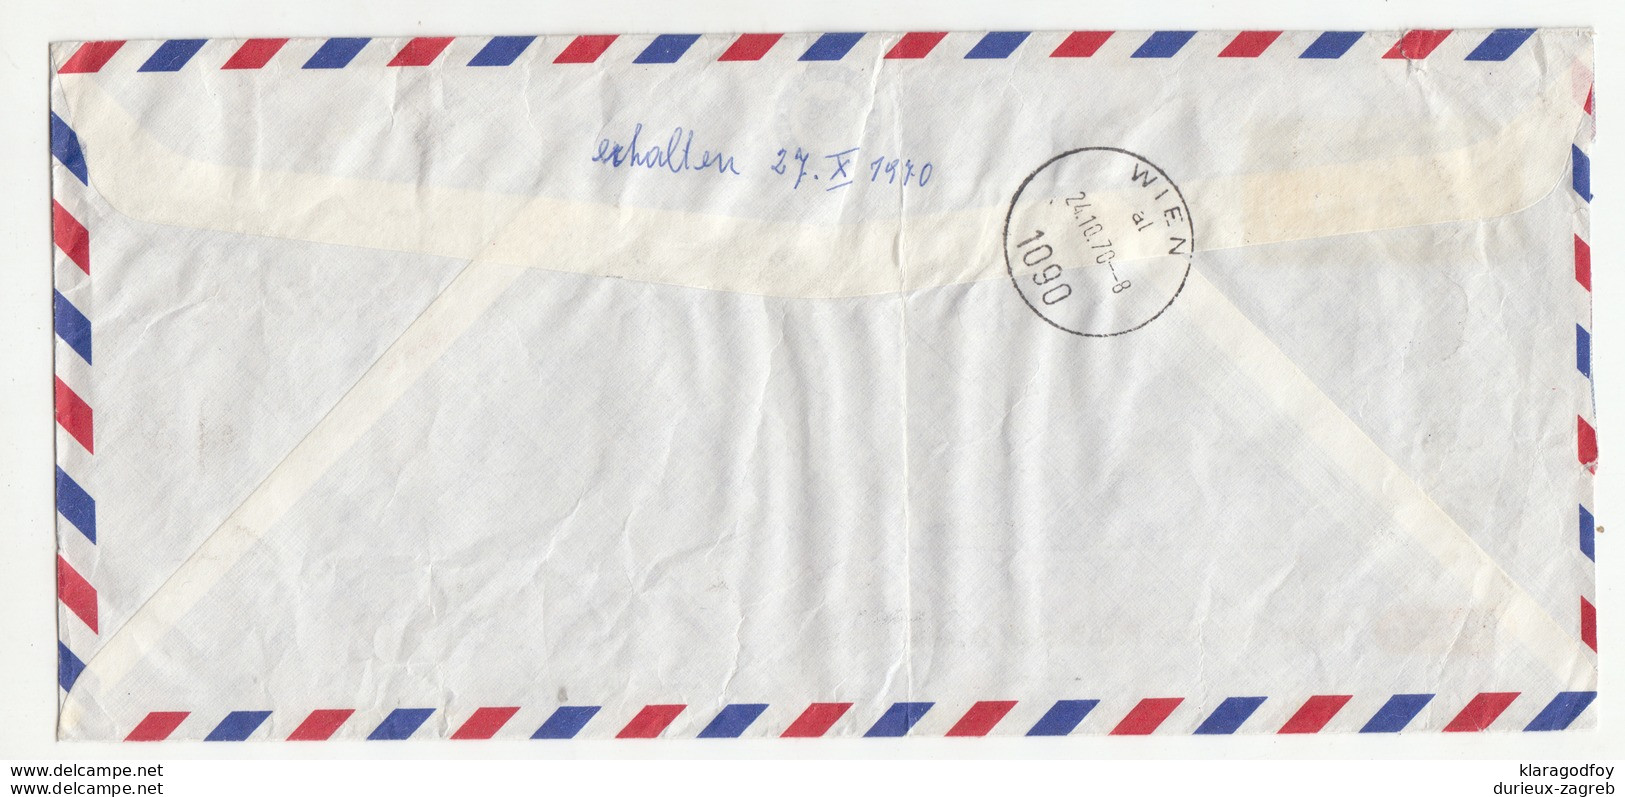 Kores Osaka Company - Multifranked Letter Cover Posted Registered 1970 To Austria B200520 - Covers & Documents